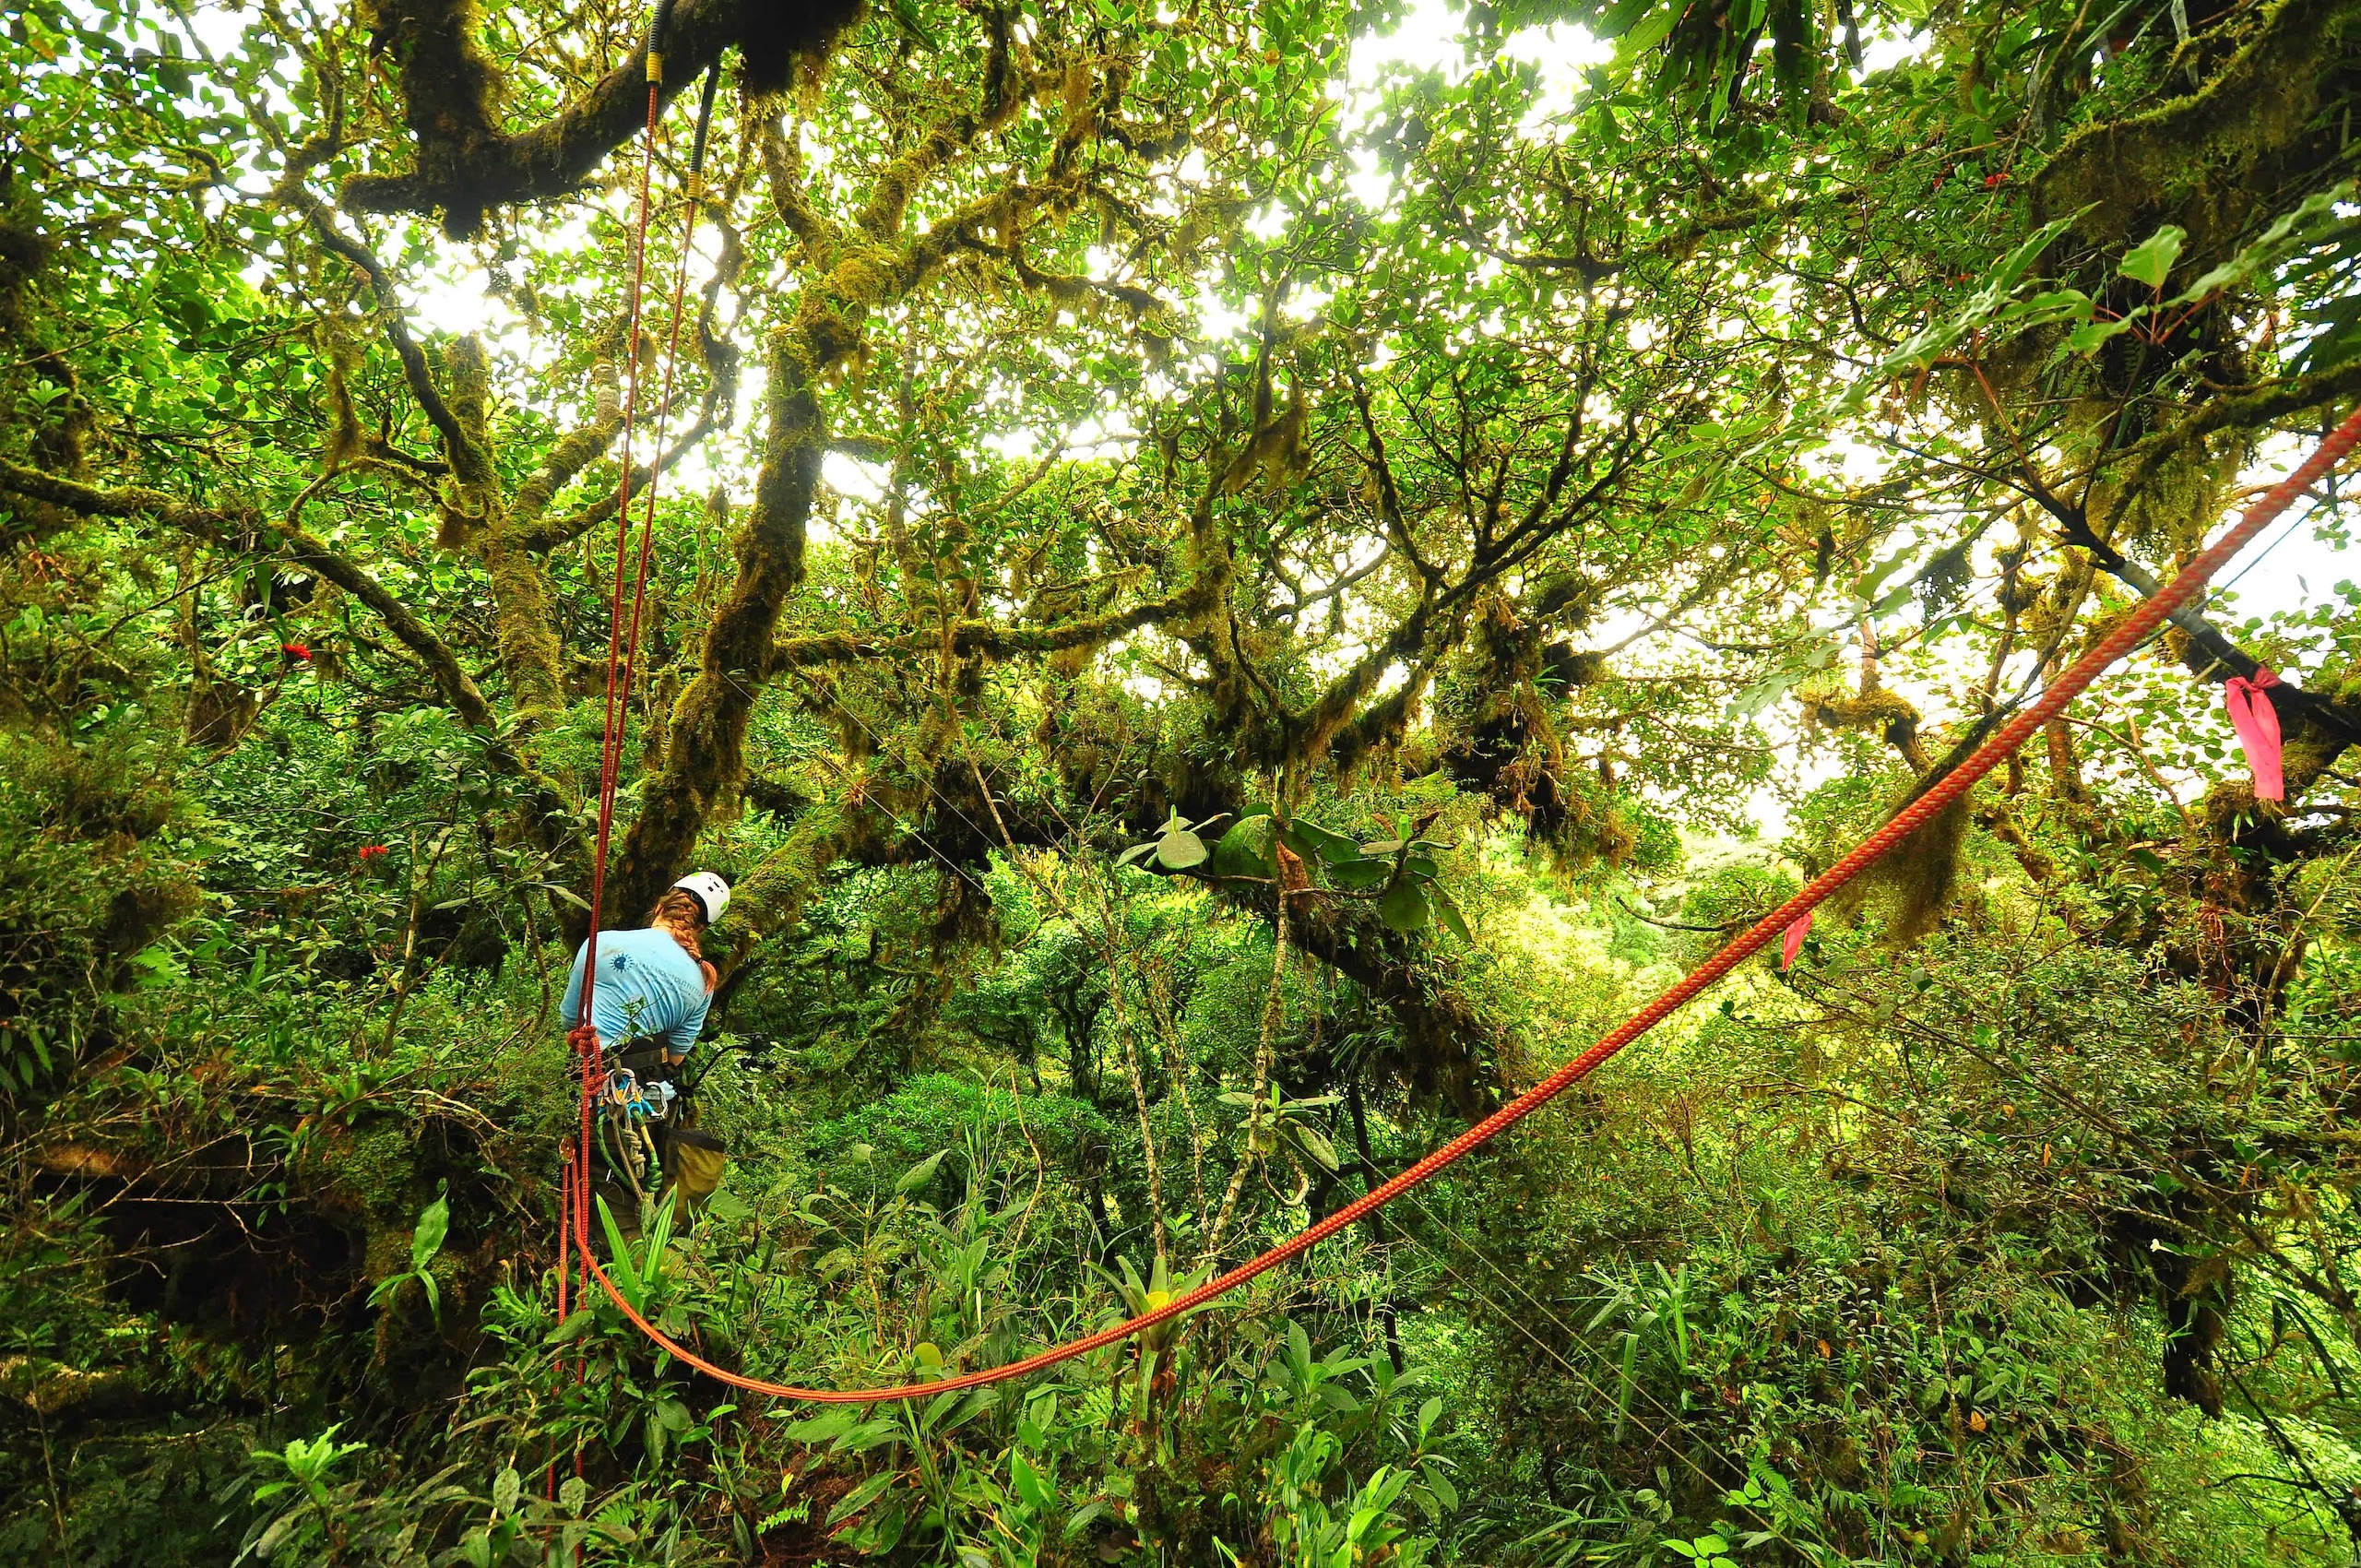 A biologists hangs from ropes in the forest canopy to conduct research